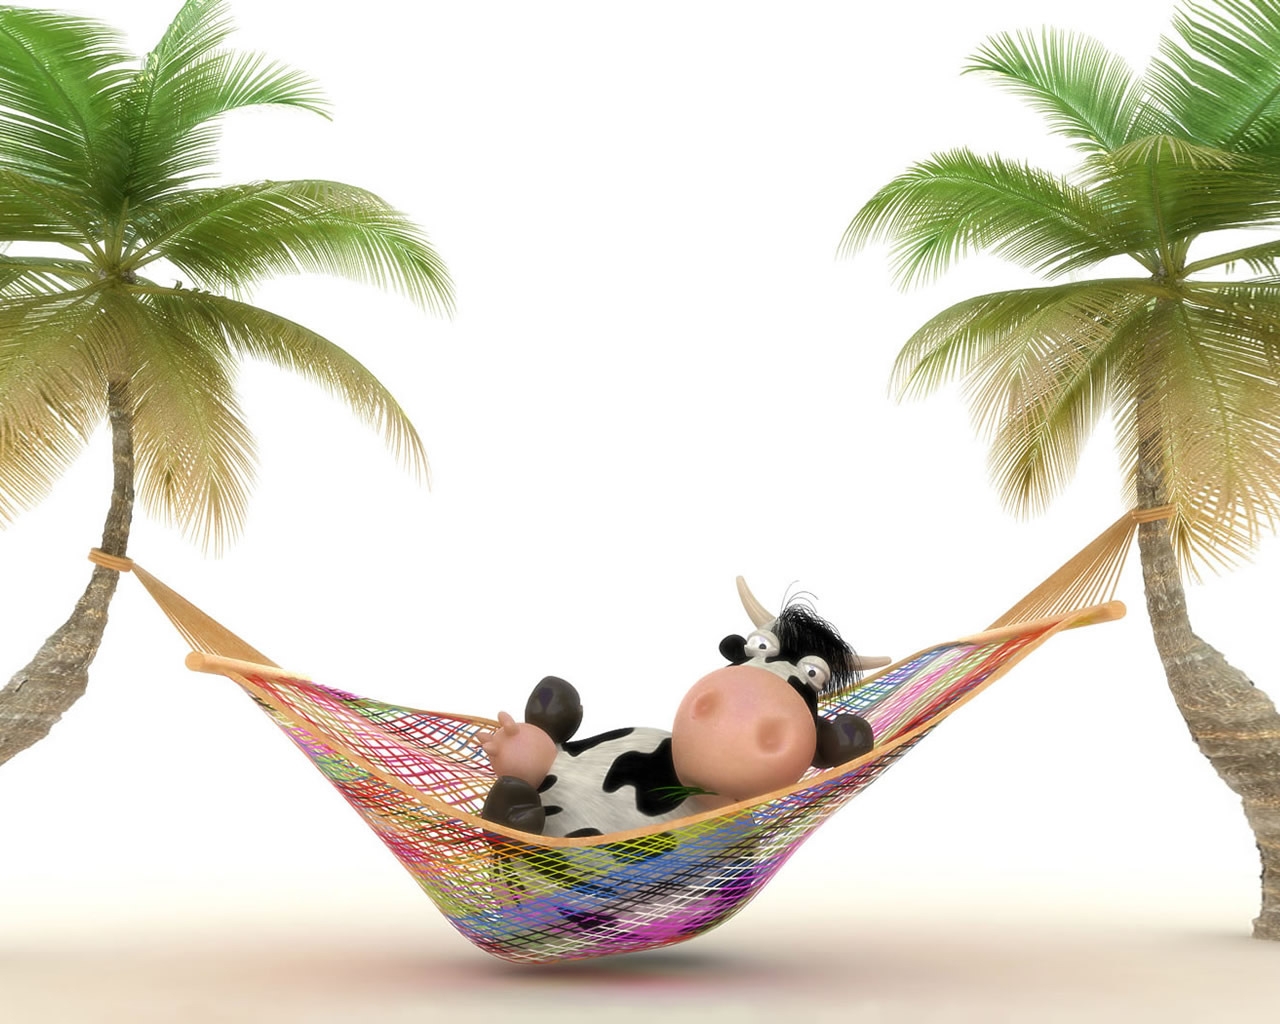 Cow relaxing in Hammock for 1280 x 1024 resolution